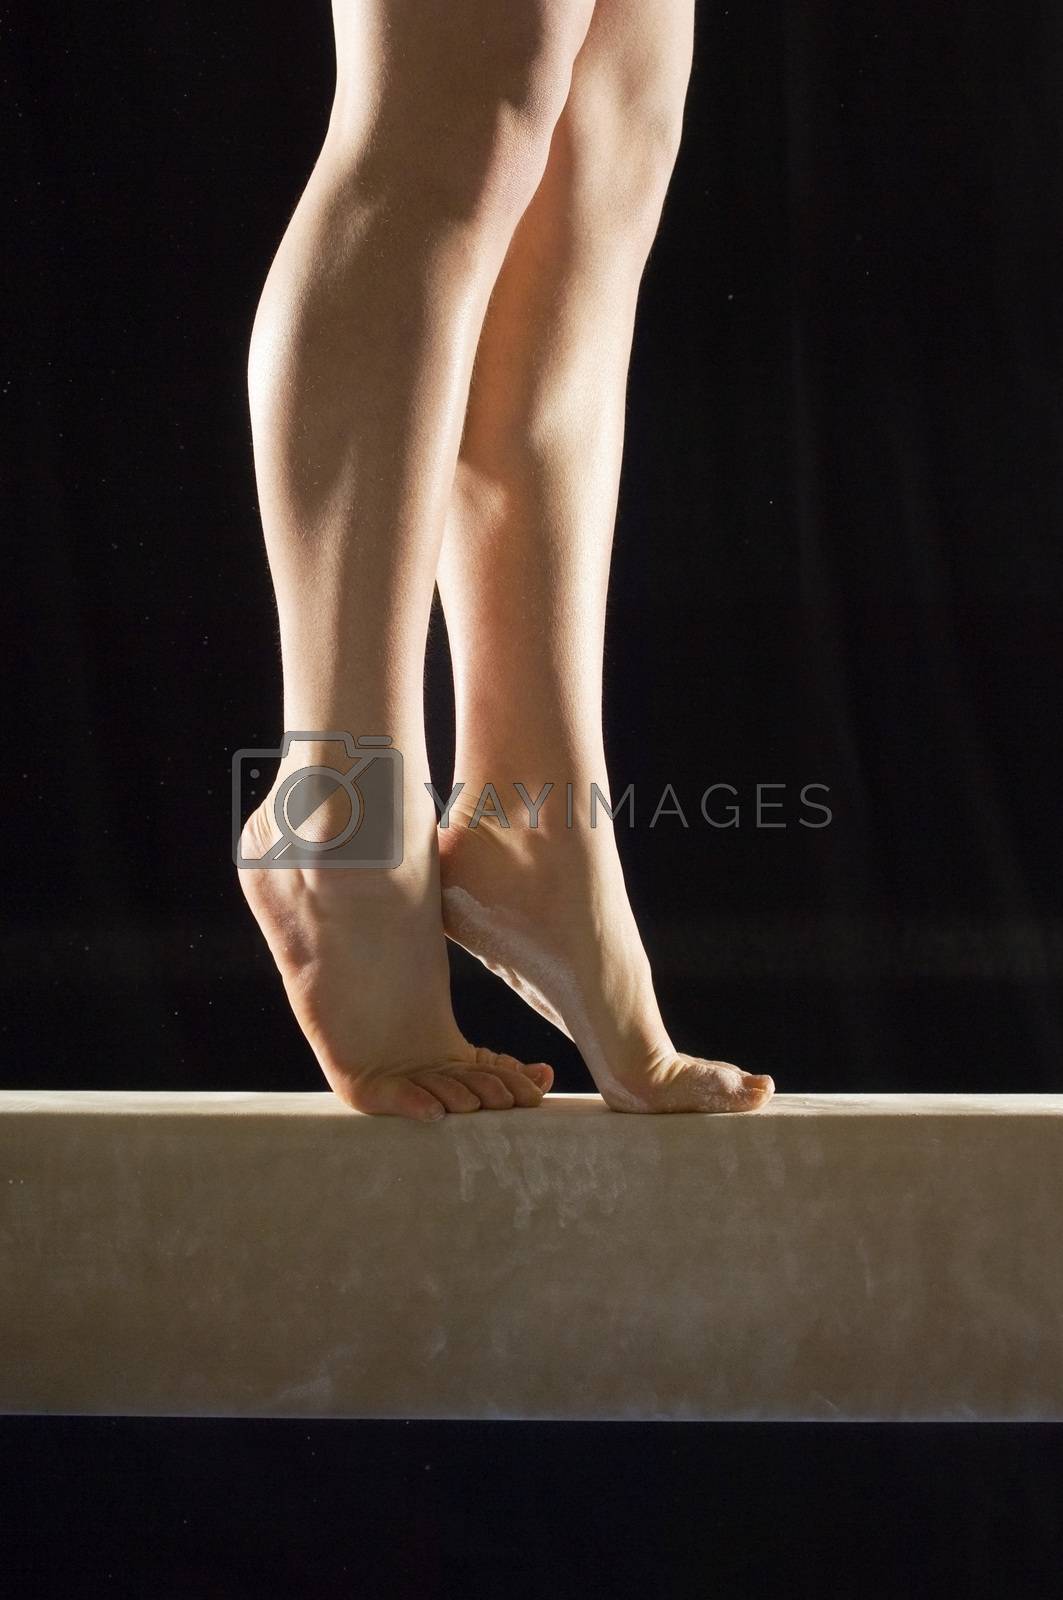 Royalty free image of Closeup low section of a female gymnast on balance beam against black background by moodboard